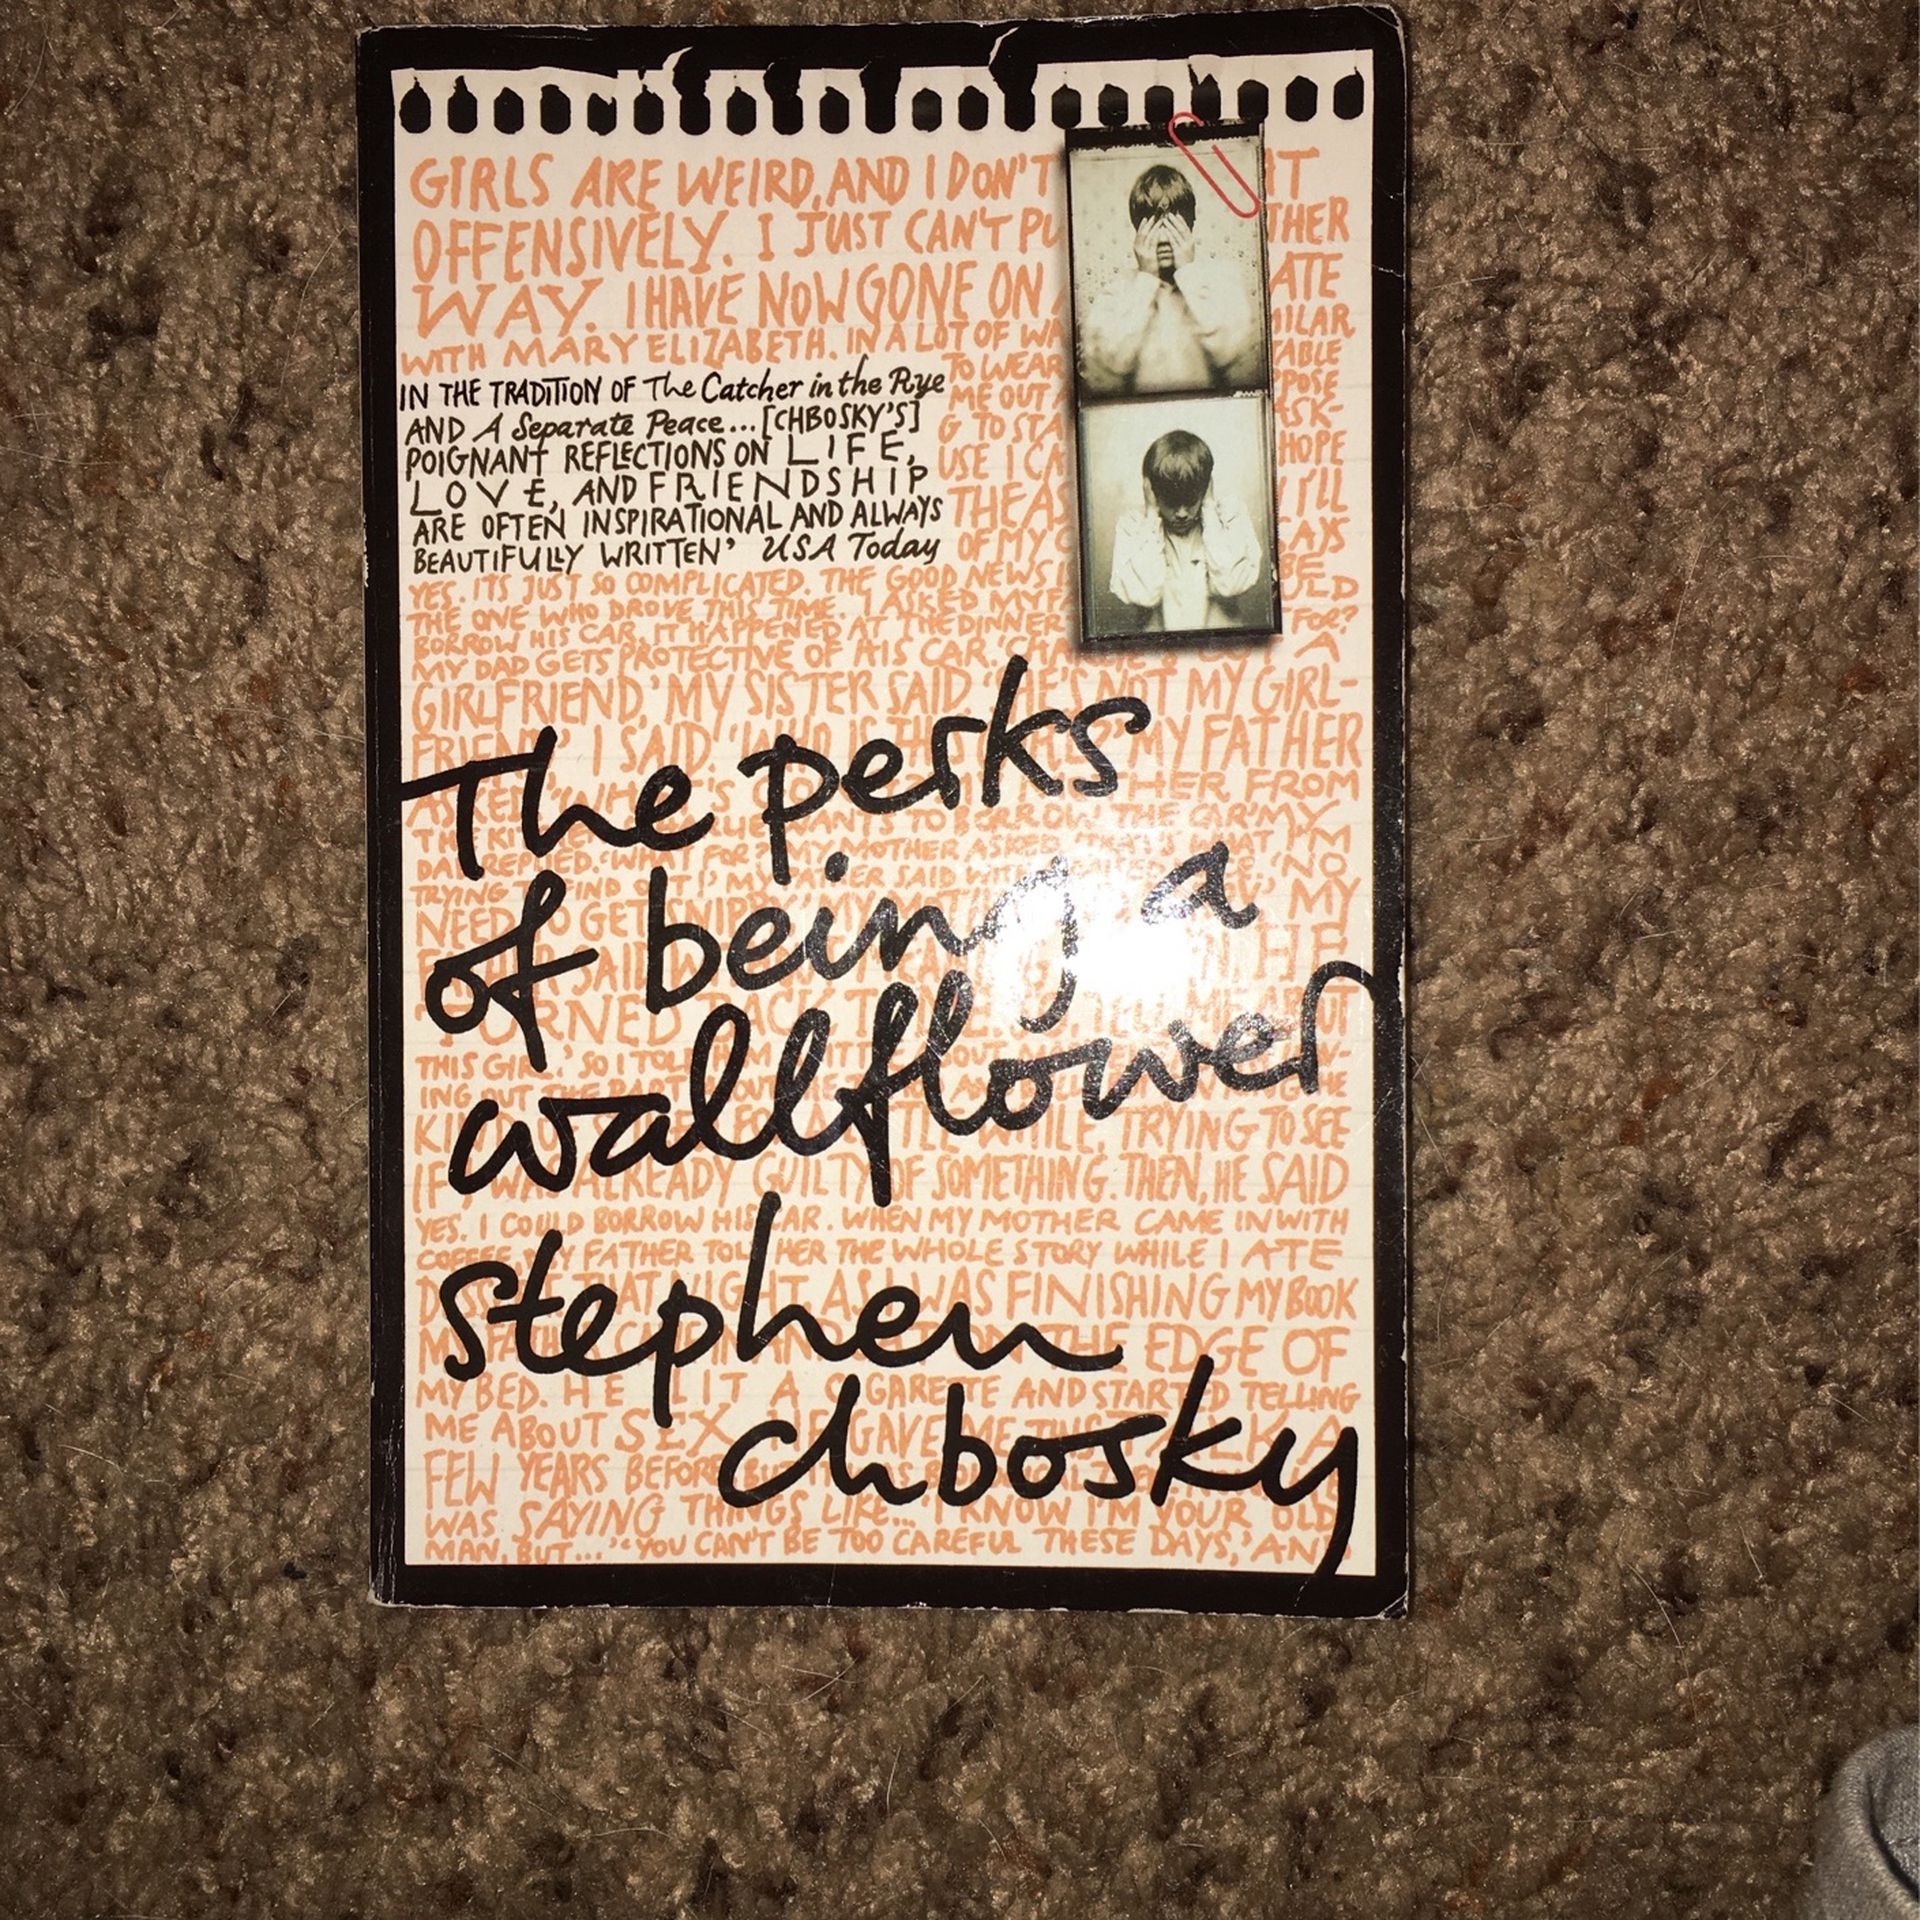 Th Perks Of Being A Wallflower (Book)